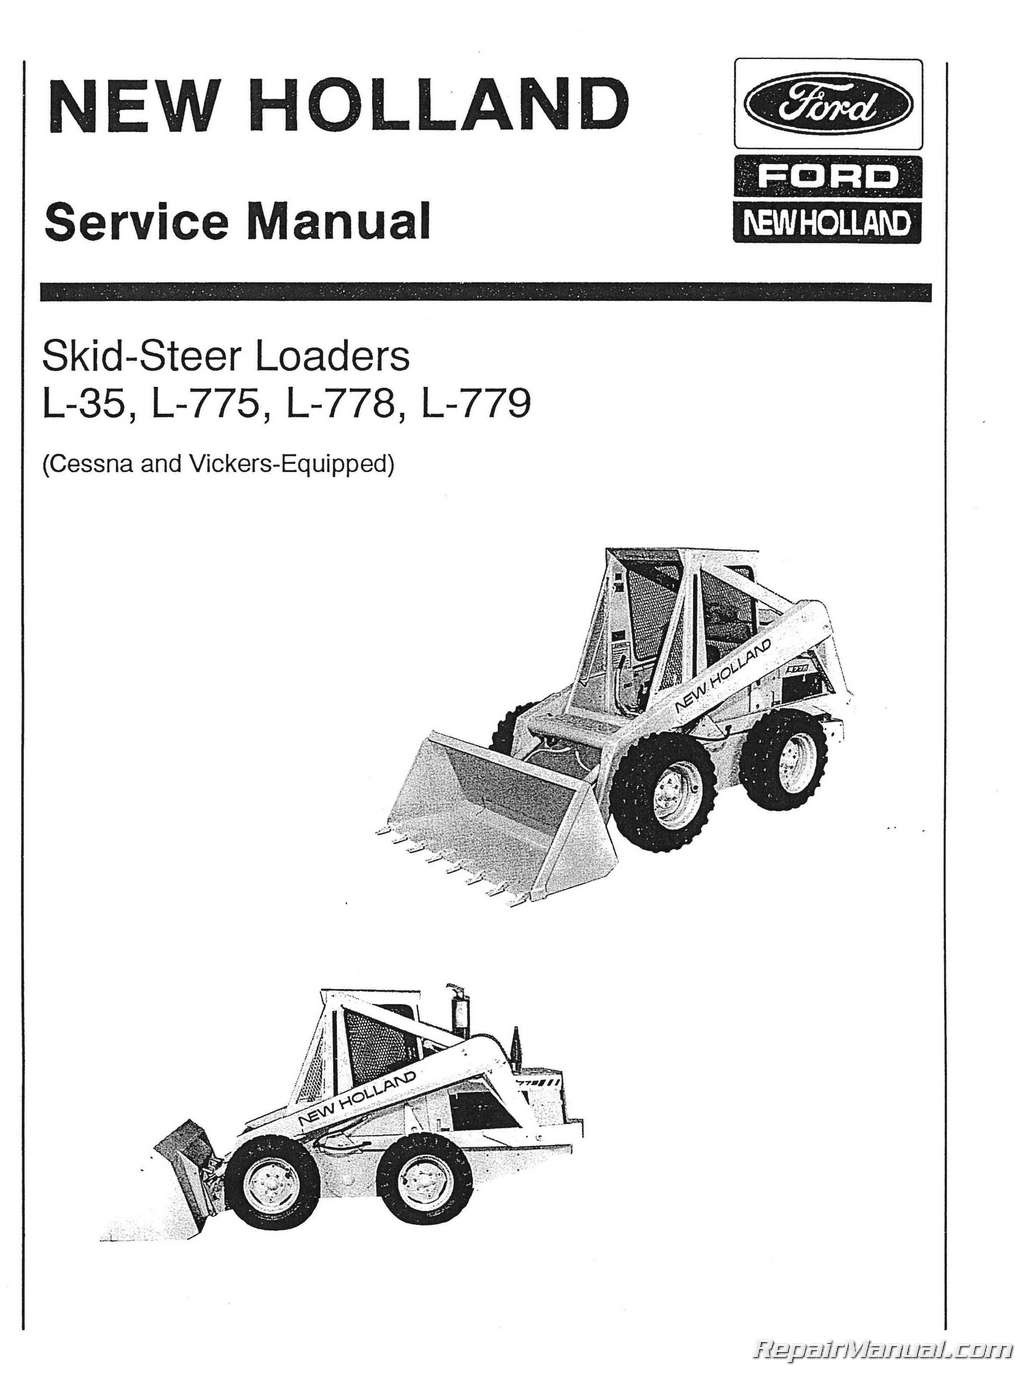 New Holland Skid Steer Parts Diagram New Holland 775 Skid Steer Parts Diagram Wiring Diagram